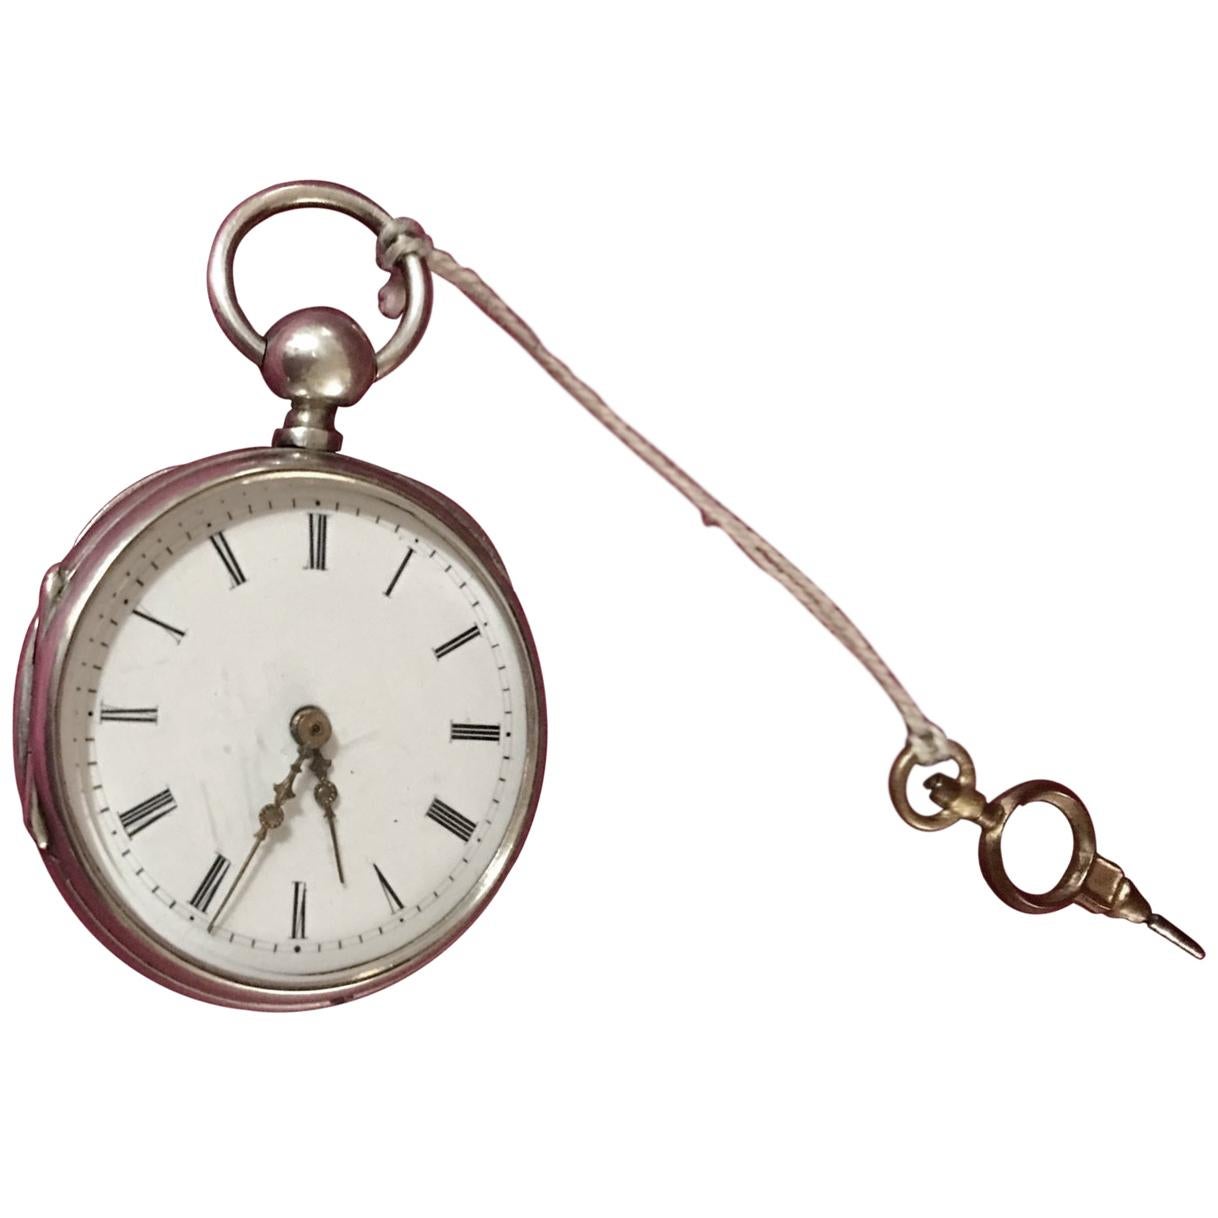 Antique Small Silver Quarter Repeater Pocket Watch